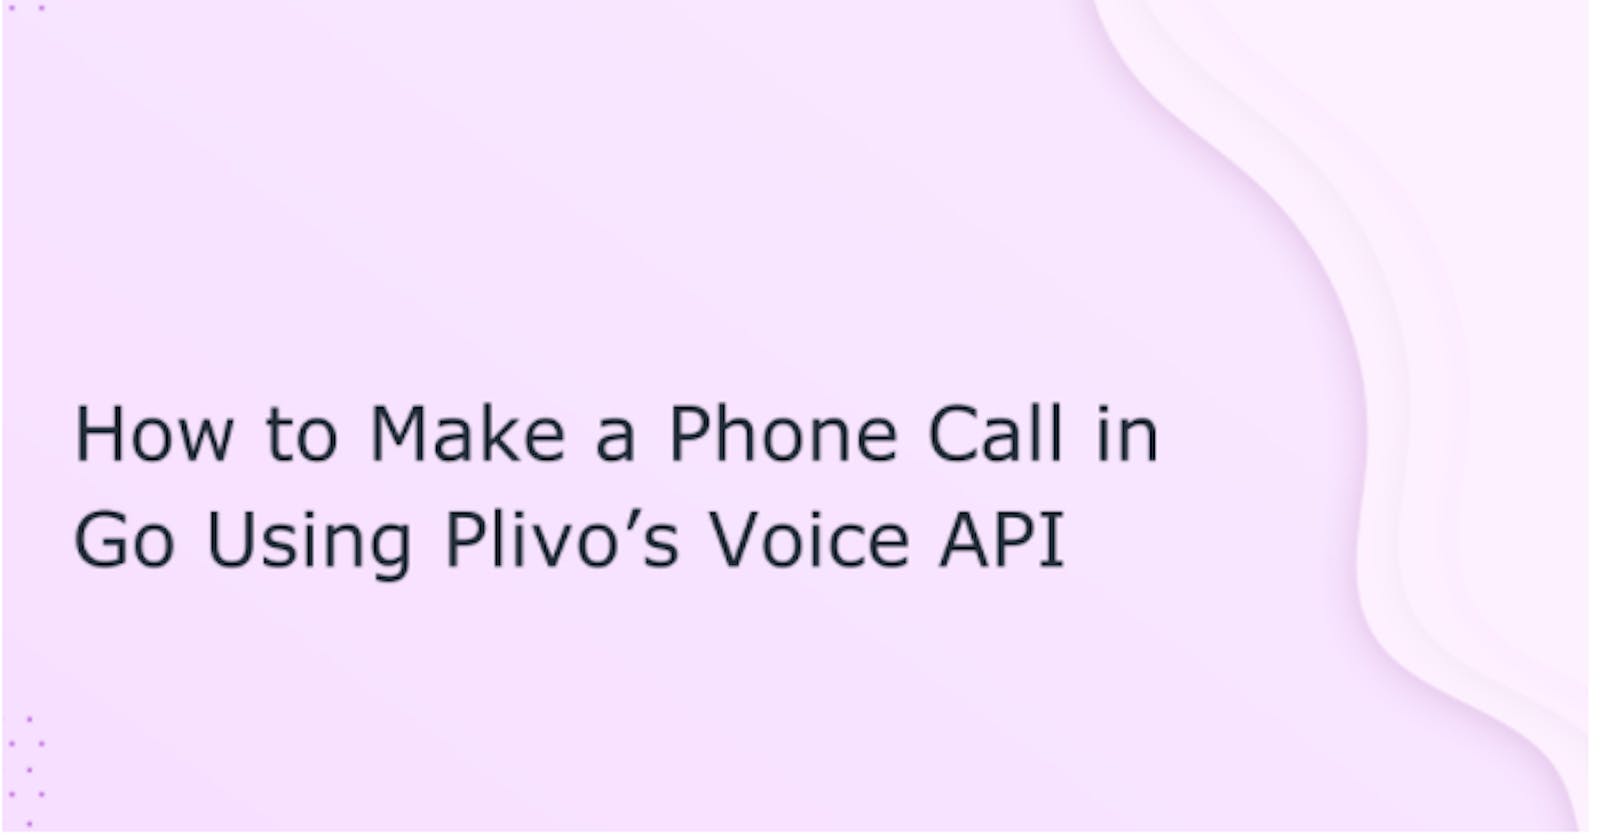 How to Make and Receive Phone Calls Using Plivo’s Voice API and Go